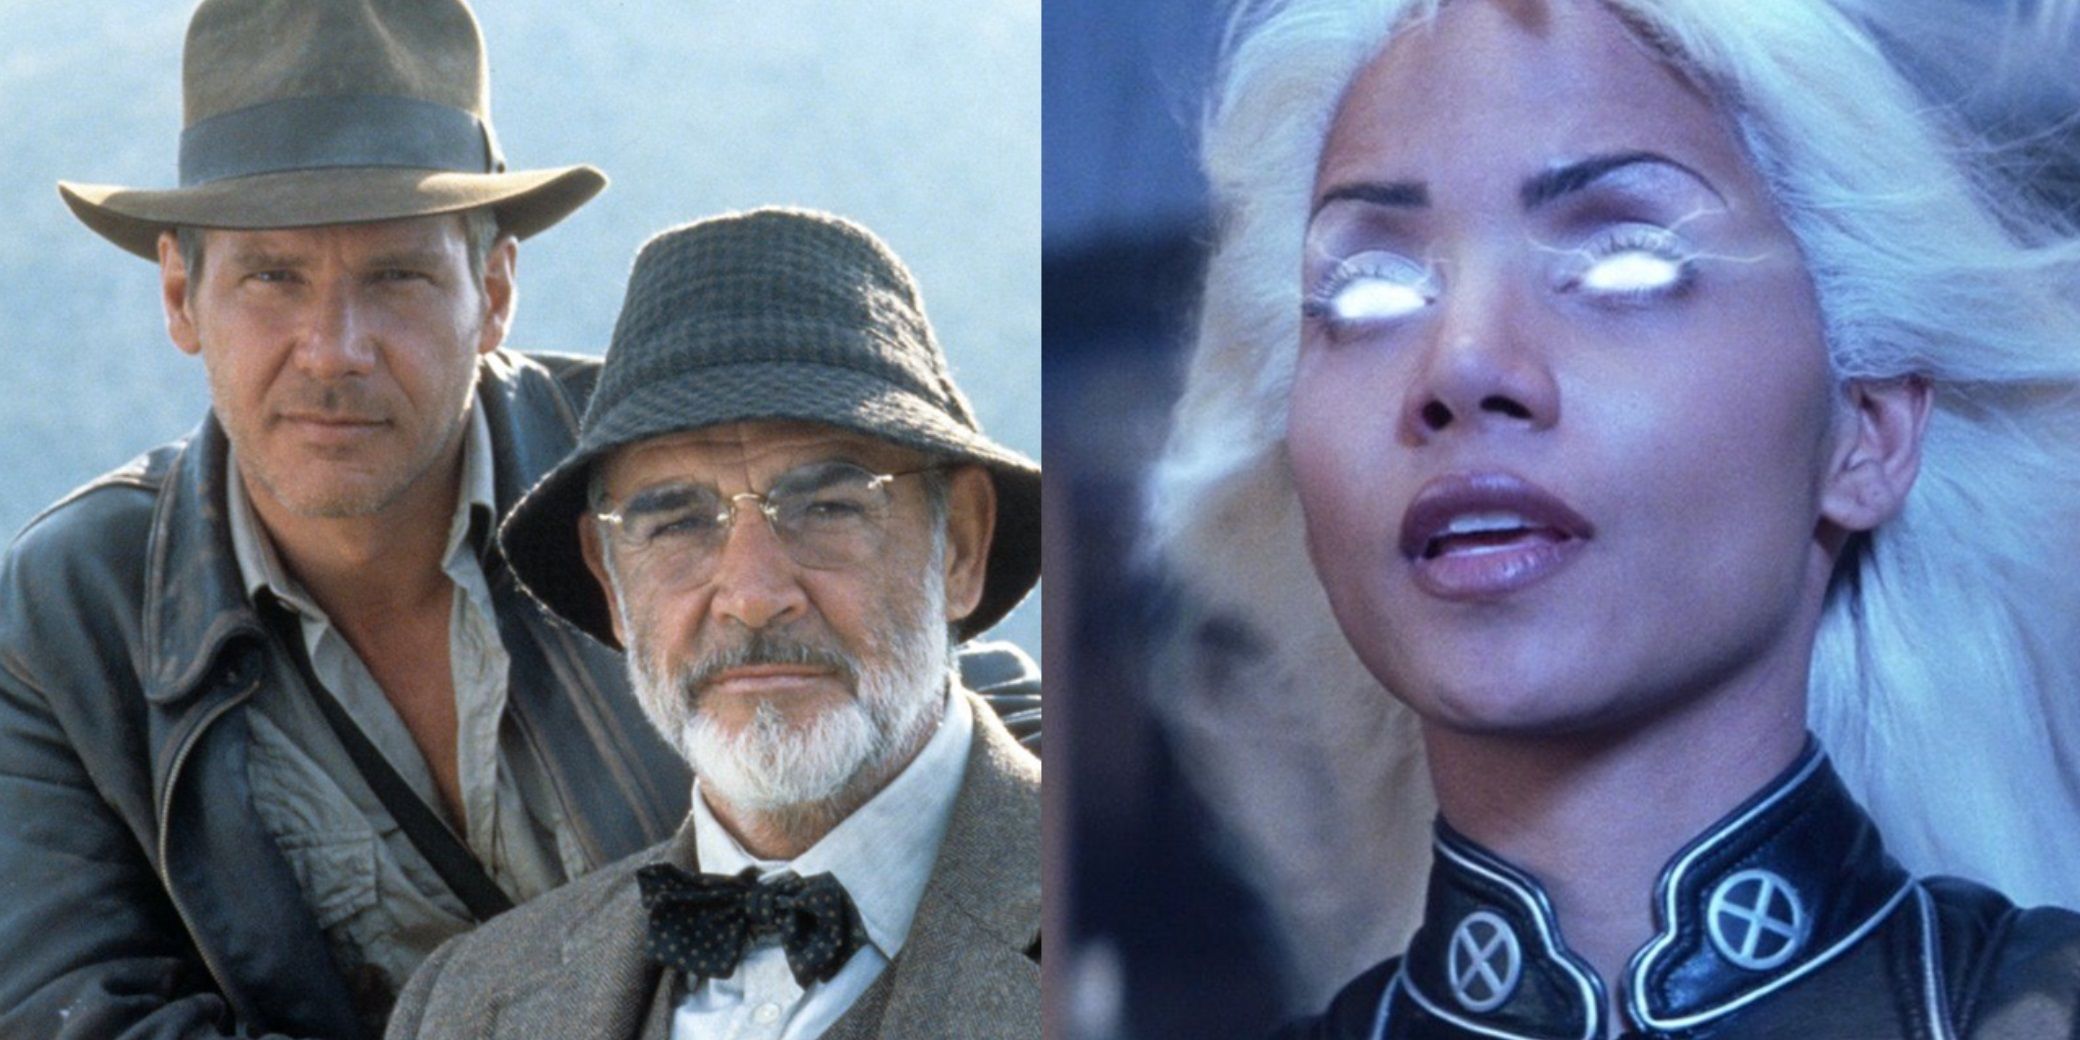 Split image of Harrison Ford and Sean Connery in Indiana Jones and the Last Crusade and Halle Berry in X2